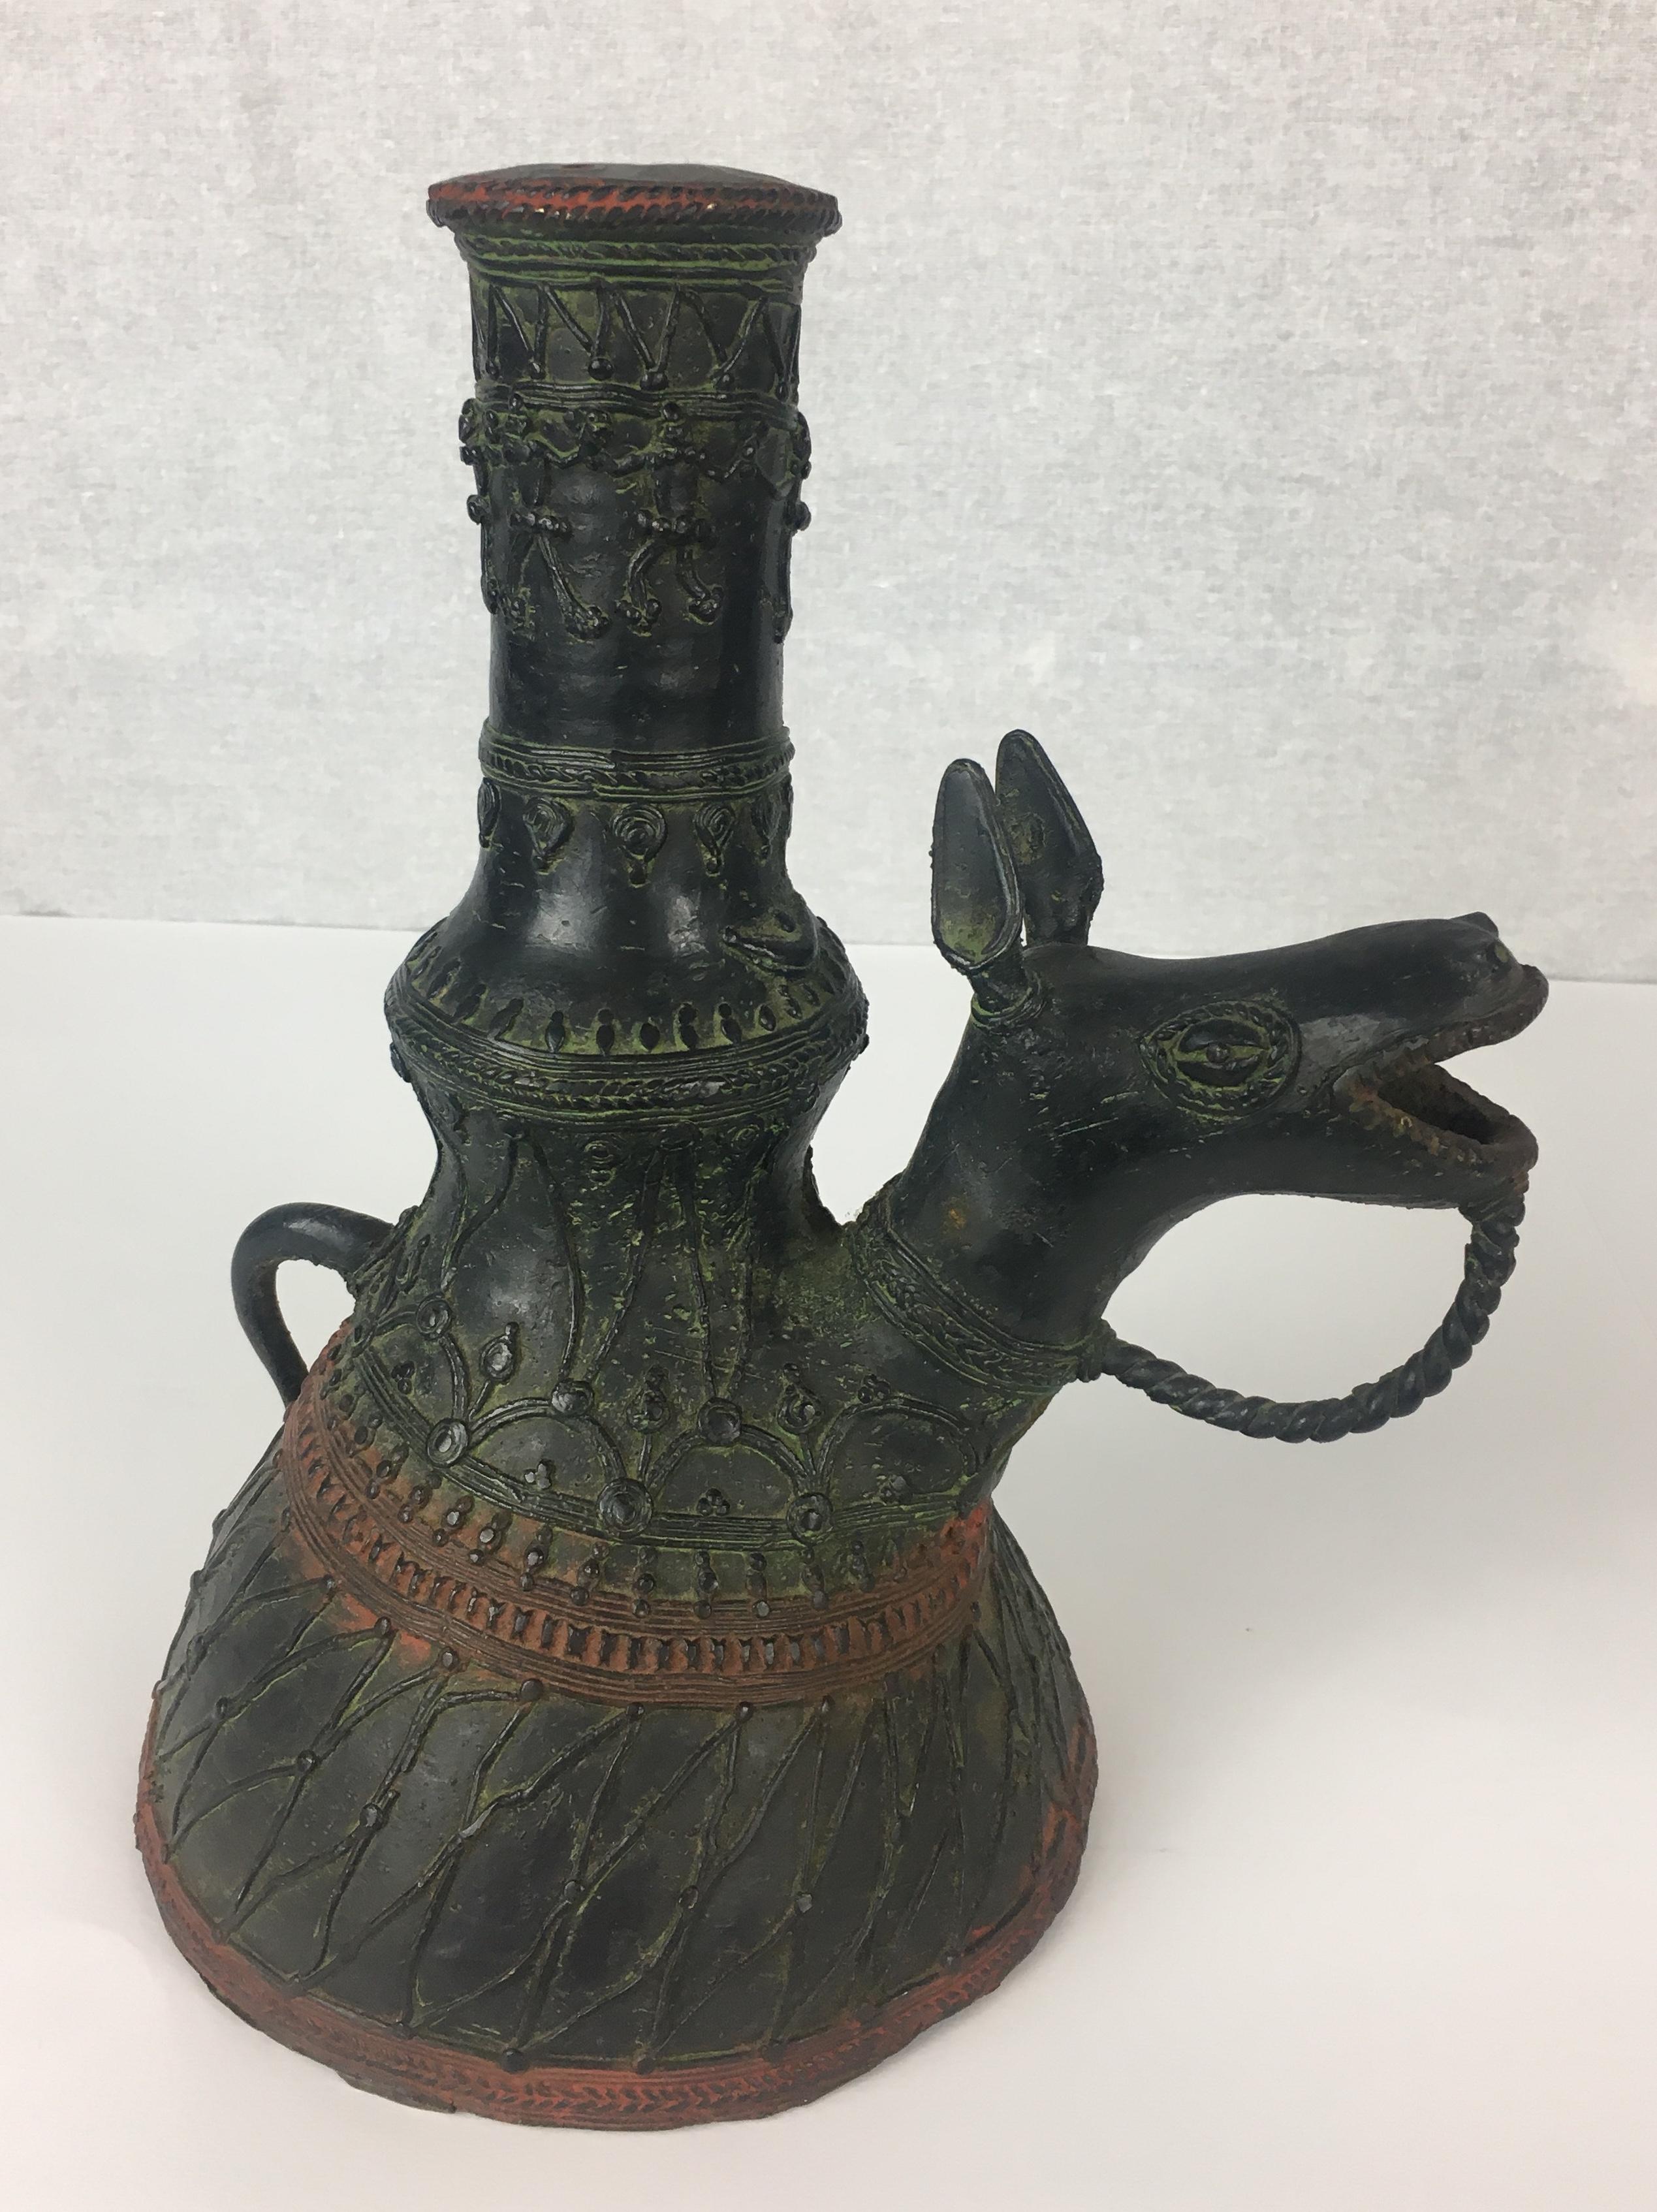 This patinated bronze incense burner or censor with well cast details has a very nice green patination, inspired by the far east. Cast at the beginning of the 20th century.

The piece is in good overall condition, it is complete and is pleasingly